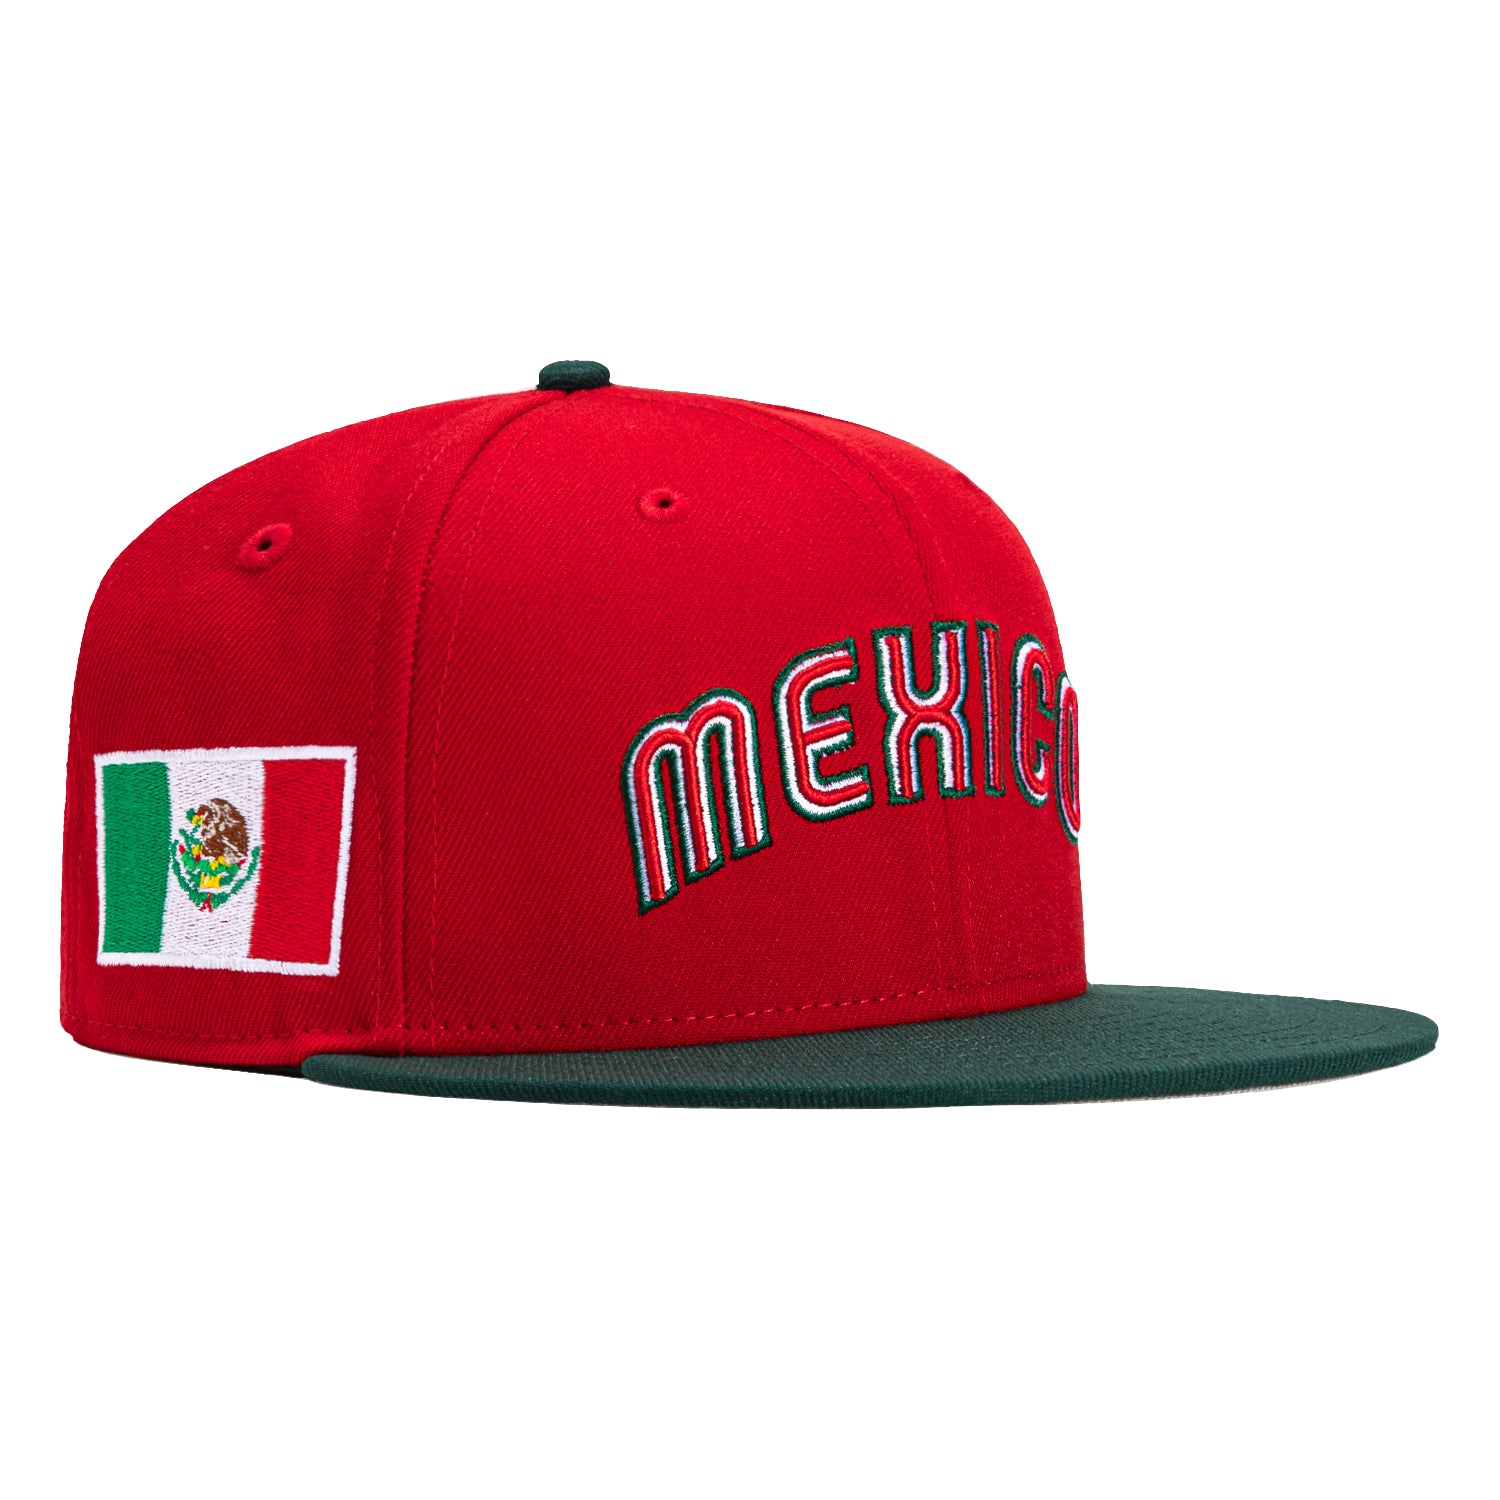 New Era 59Fifty Mexico World Baseball Classic Jersey Hat - Red, Green ...